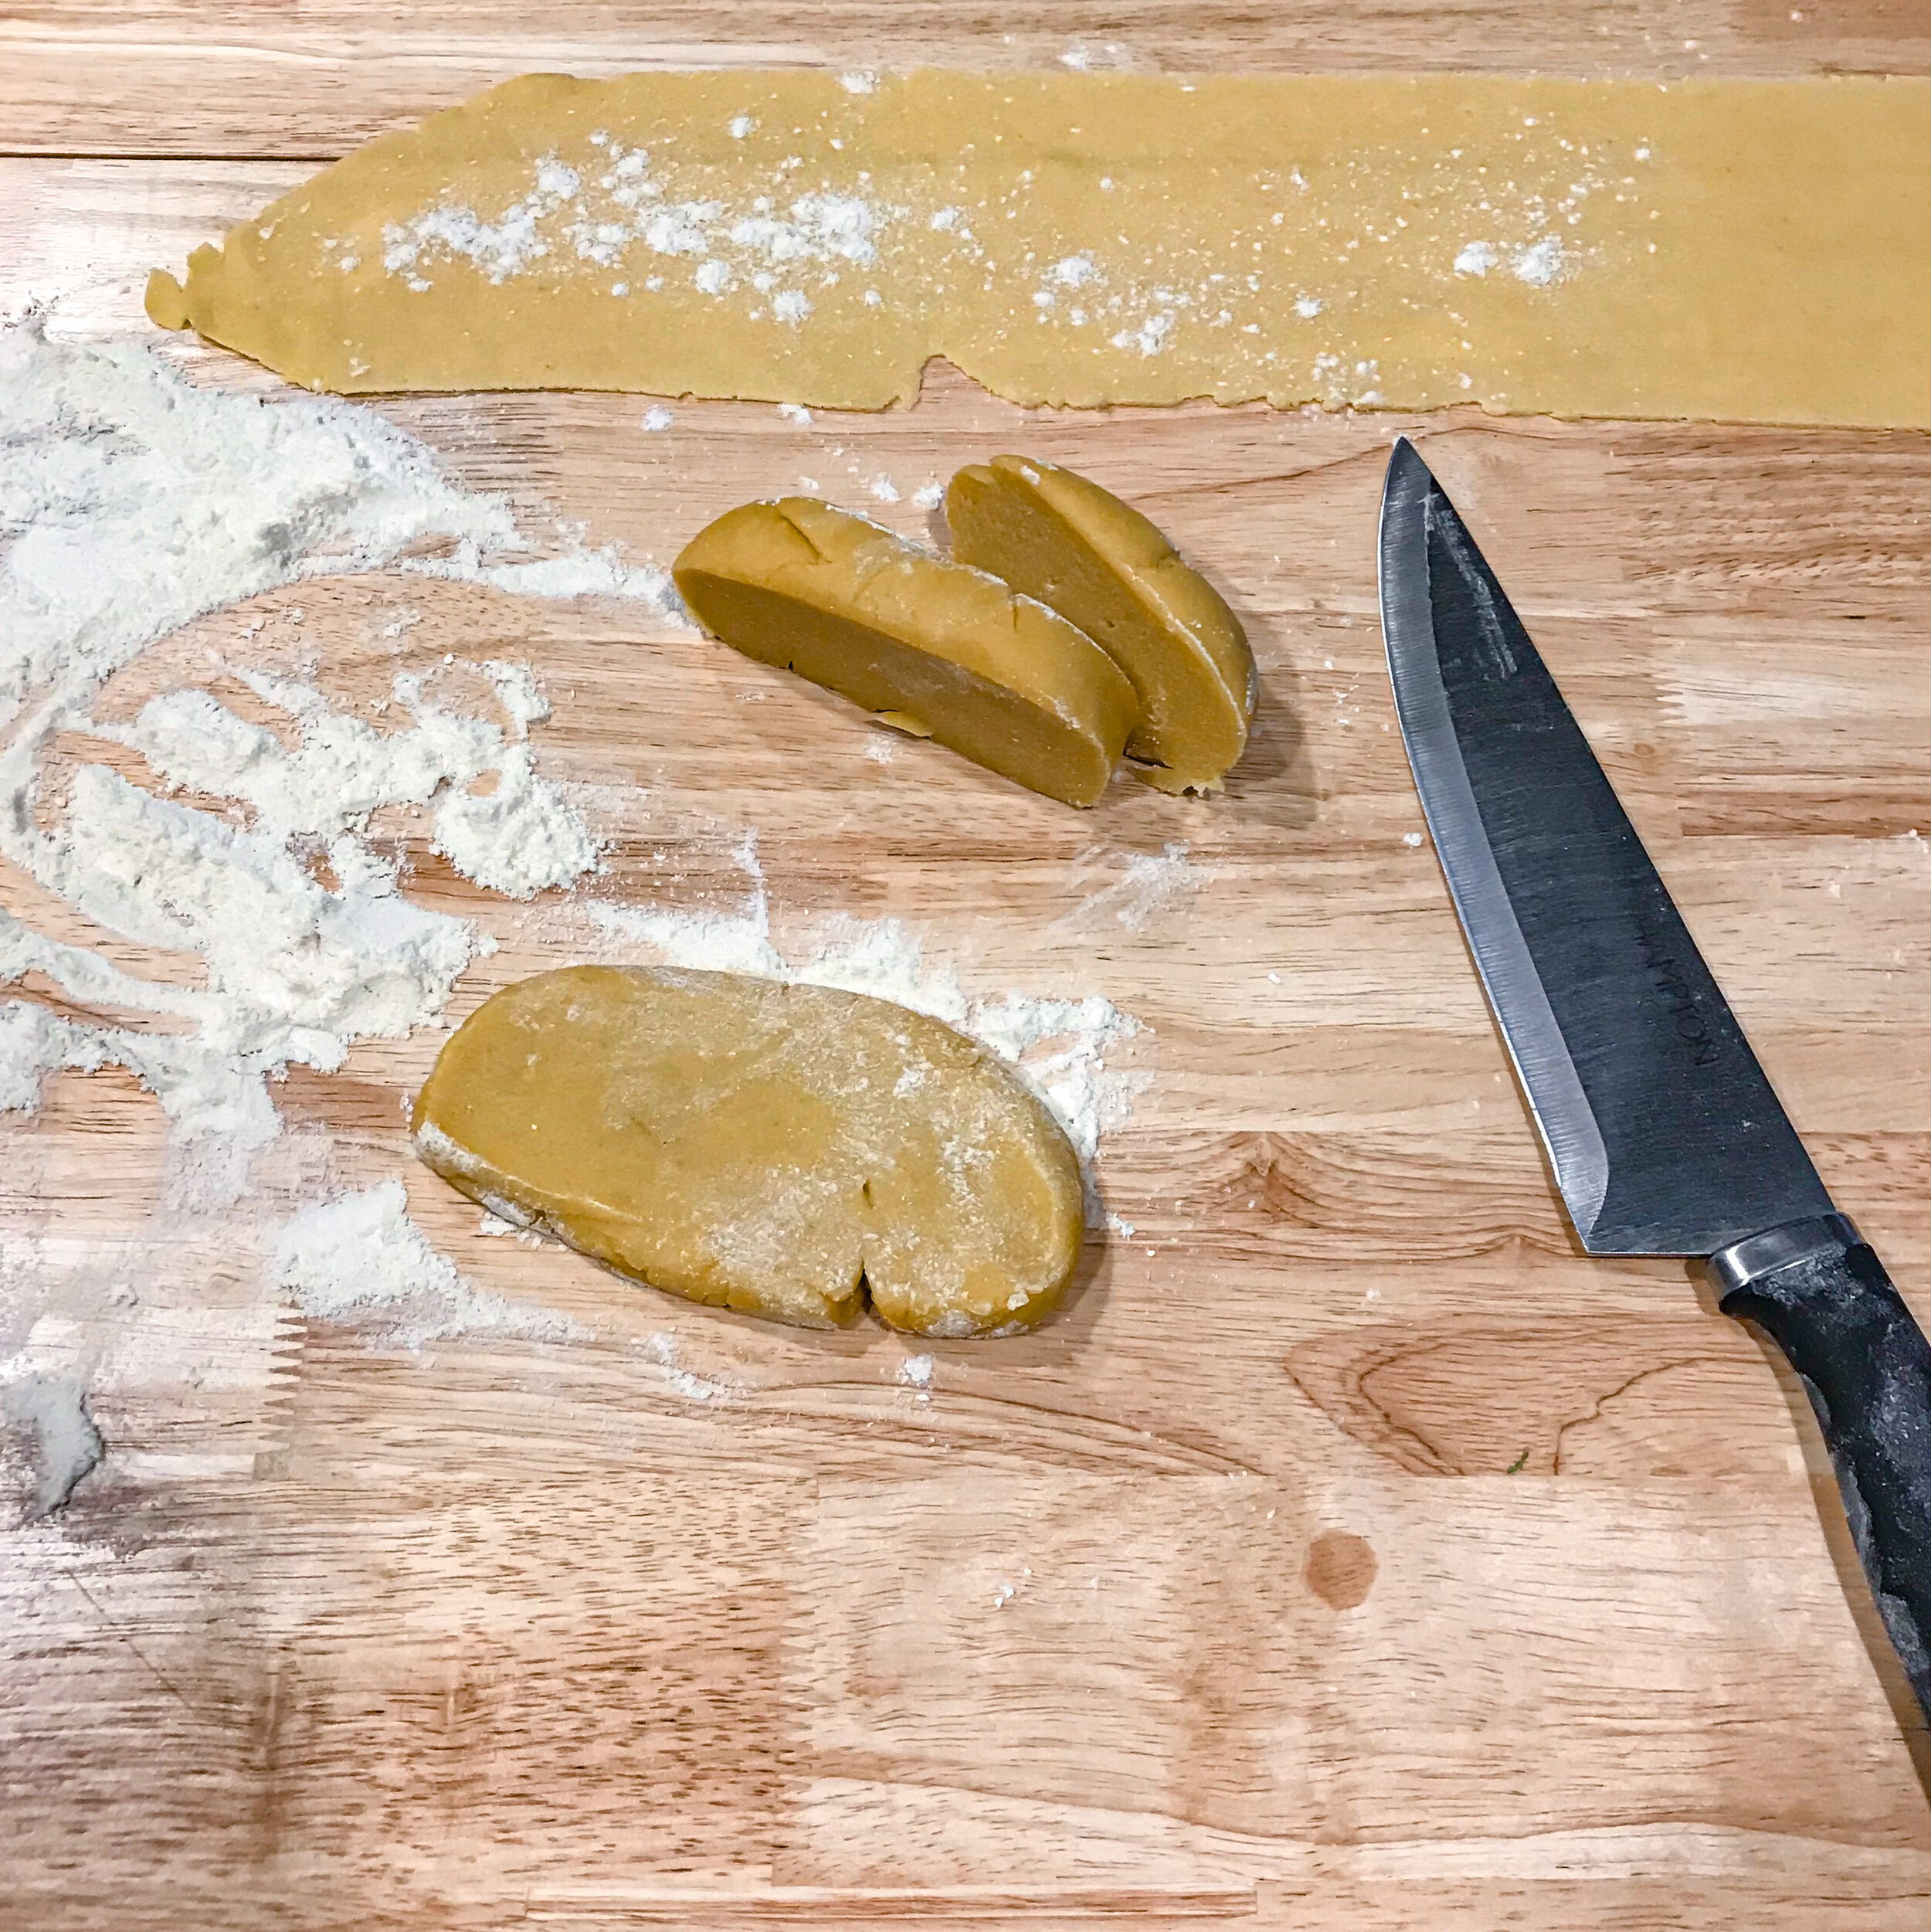 Slice your dough ball into equal sections and flatten into disks.